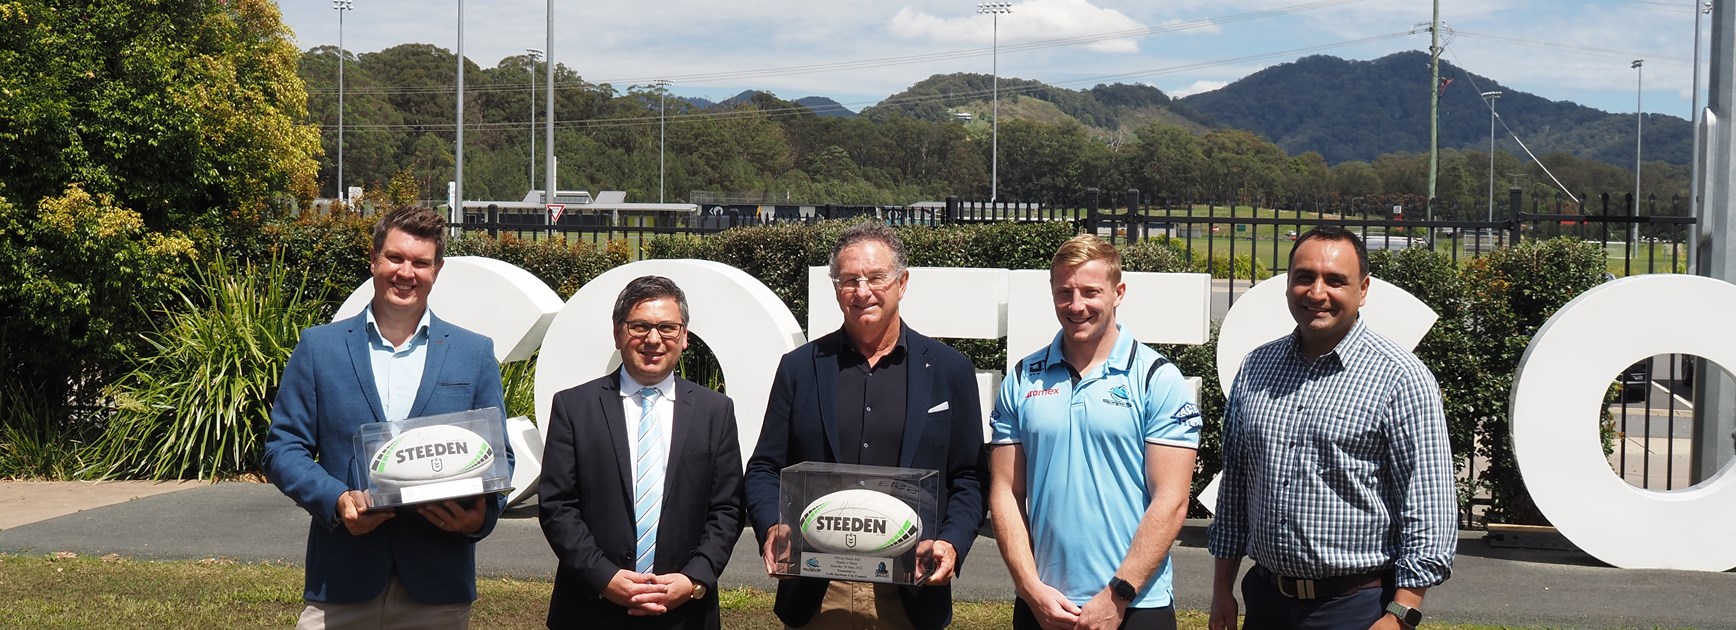 Sharks to return to the Coffs Coast in 2023